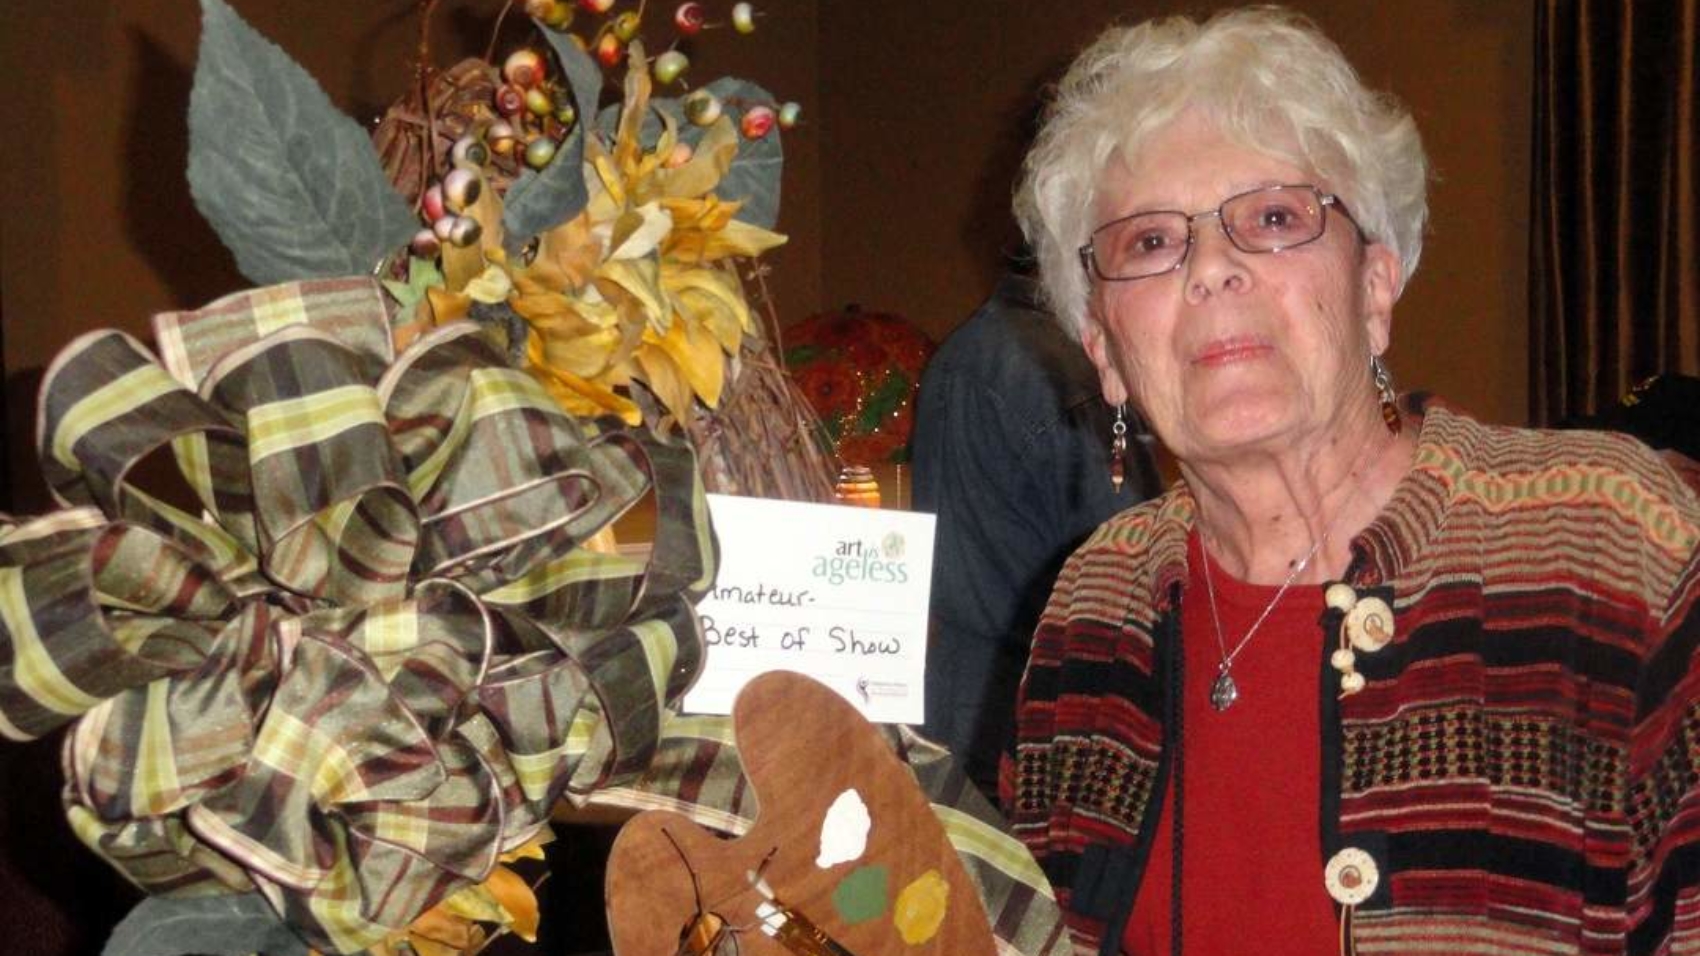 “Painter Delight Wreath” by Mutz Maples was Best in Show in the amateur category.